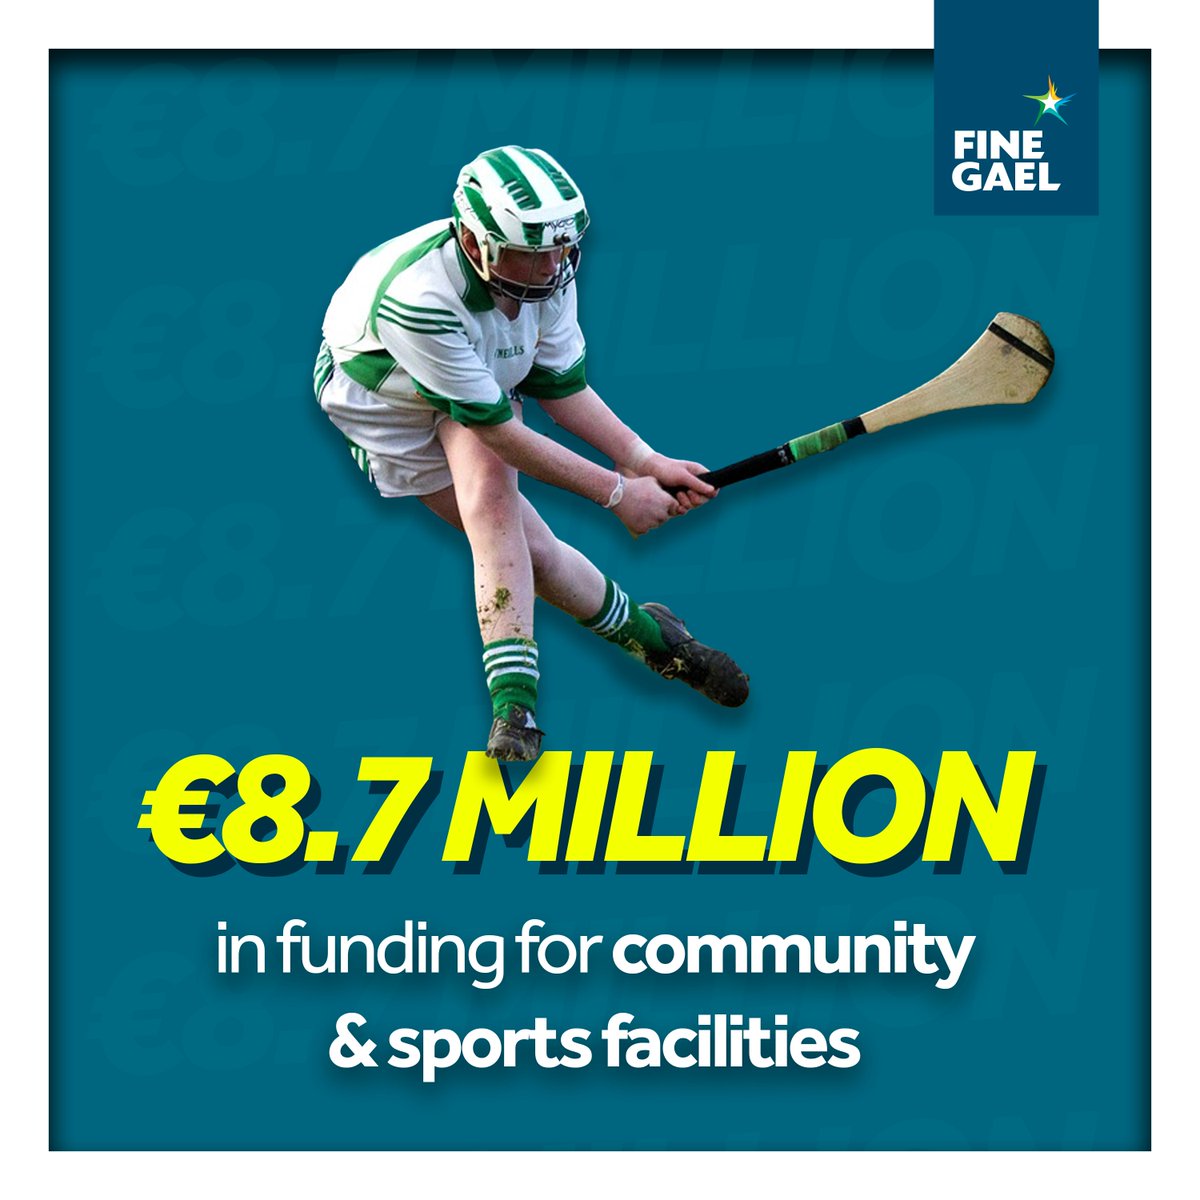 Fine Gael is building stronger communities with €8.7 million in funding for community and sports facilities across the country. This includes grants of up to €50,000 for the renovation and upgrade of community centres, parish halls, GAA clubhouses, youth facilities and more.